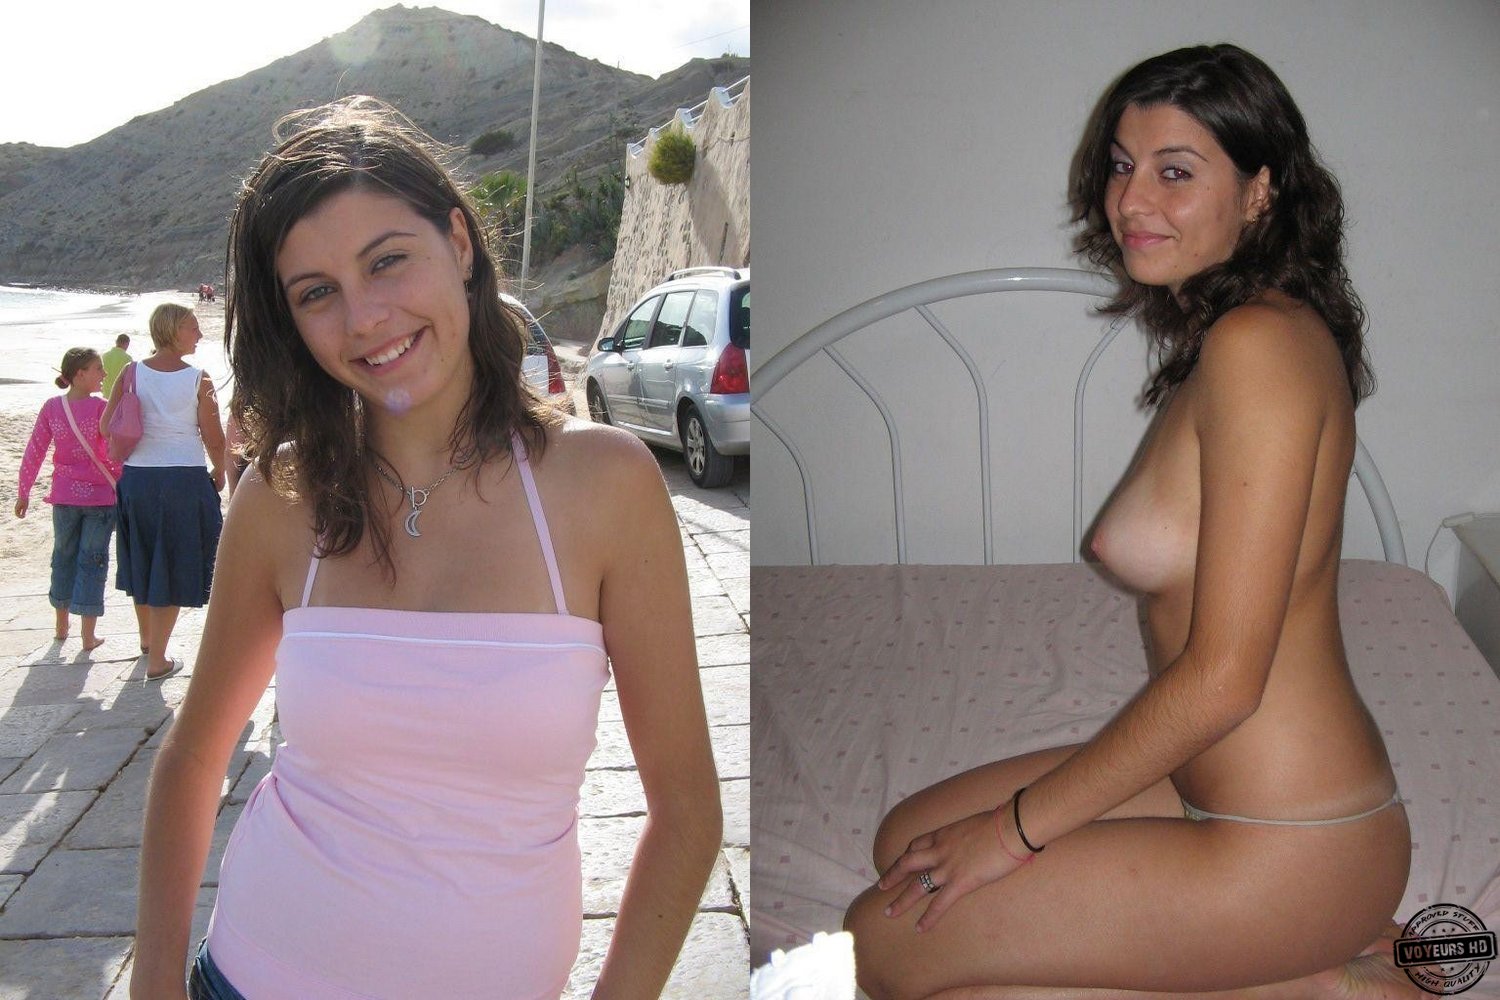 Dressed/undressed photo gallery â €" sexy brides before and after the ...